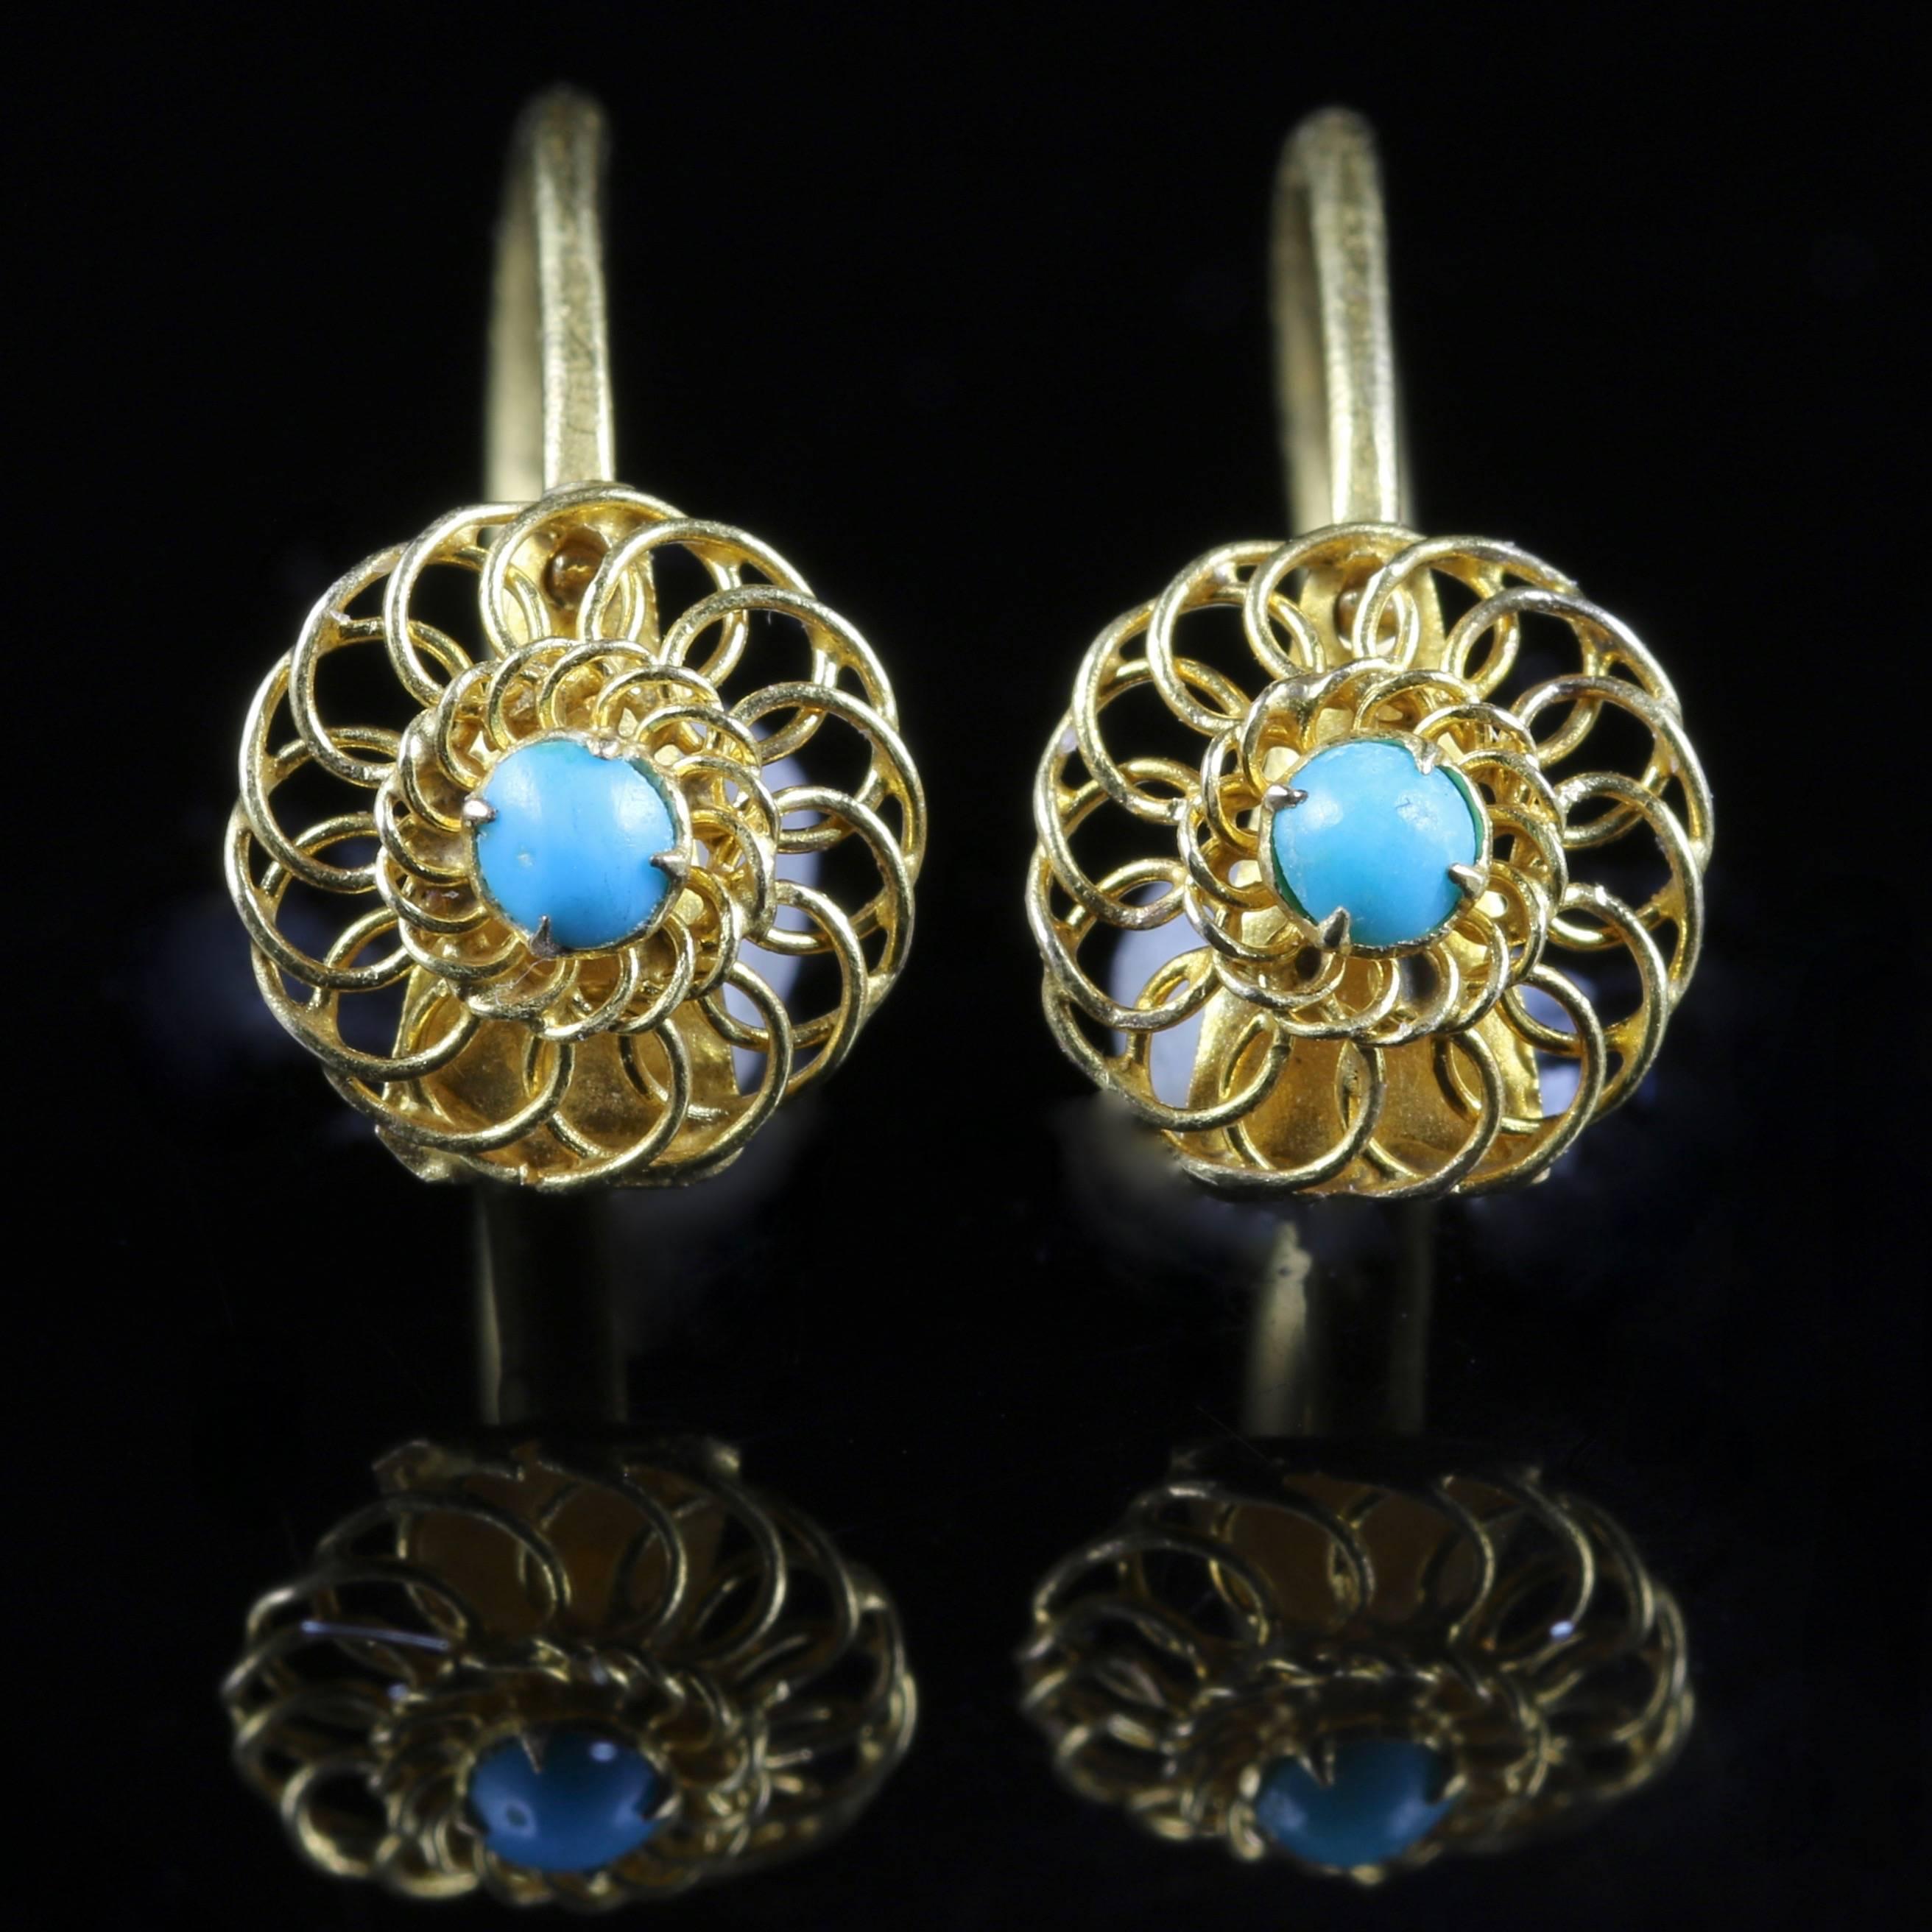 These fabulous 18ct Yellow Gold earrings are genuine Victorian Circa 1860, set with Turquoise stones and beautiful cannetille workmanship.

These gorgeous earrings can be worn night or day as the bottom earring detaches from the top, making these